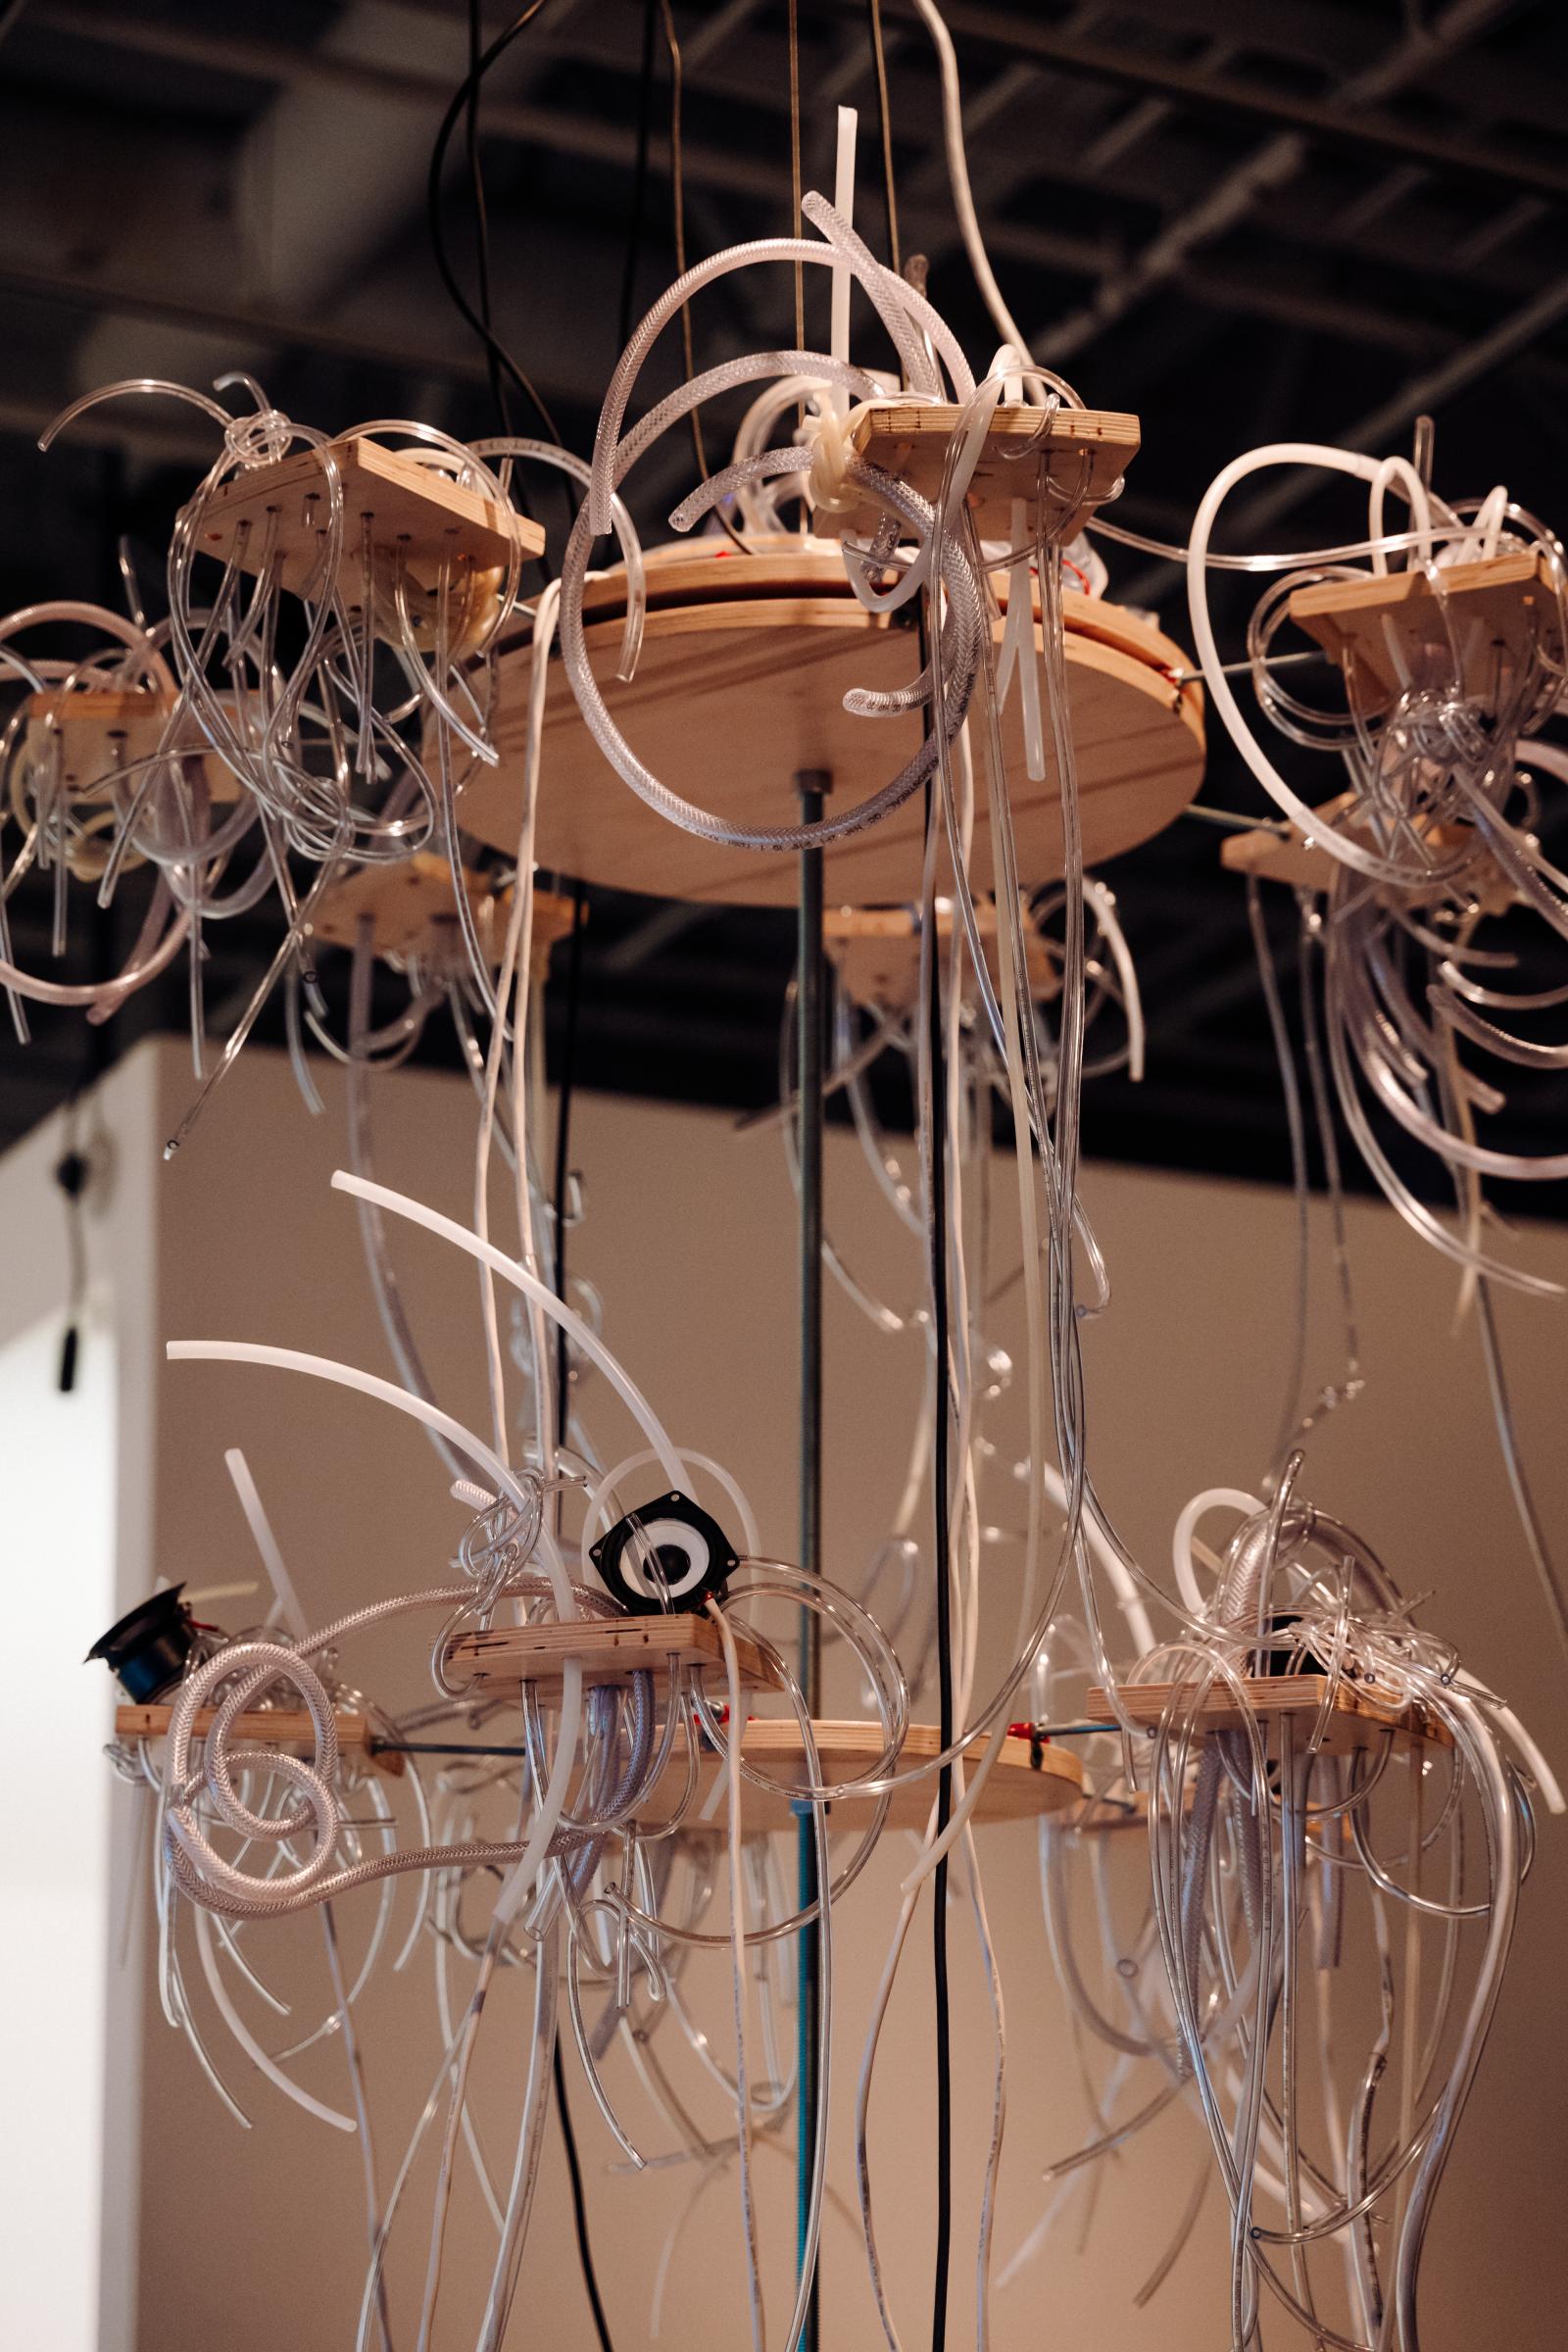 Multi-tiered suspended wooden chandelier with plastic tubes spilling outwards over the sides. There are four speakers and two microphones integrated into the sculpture. 

